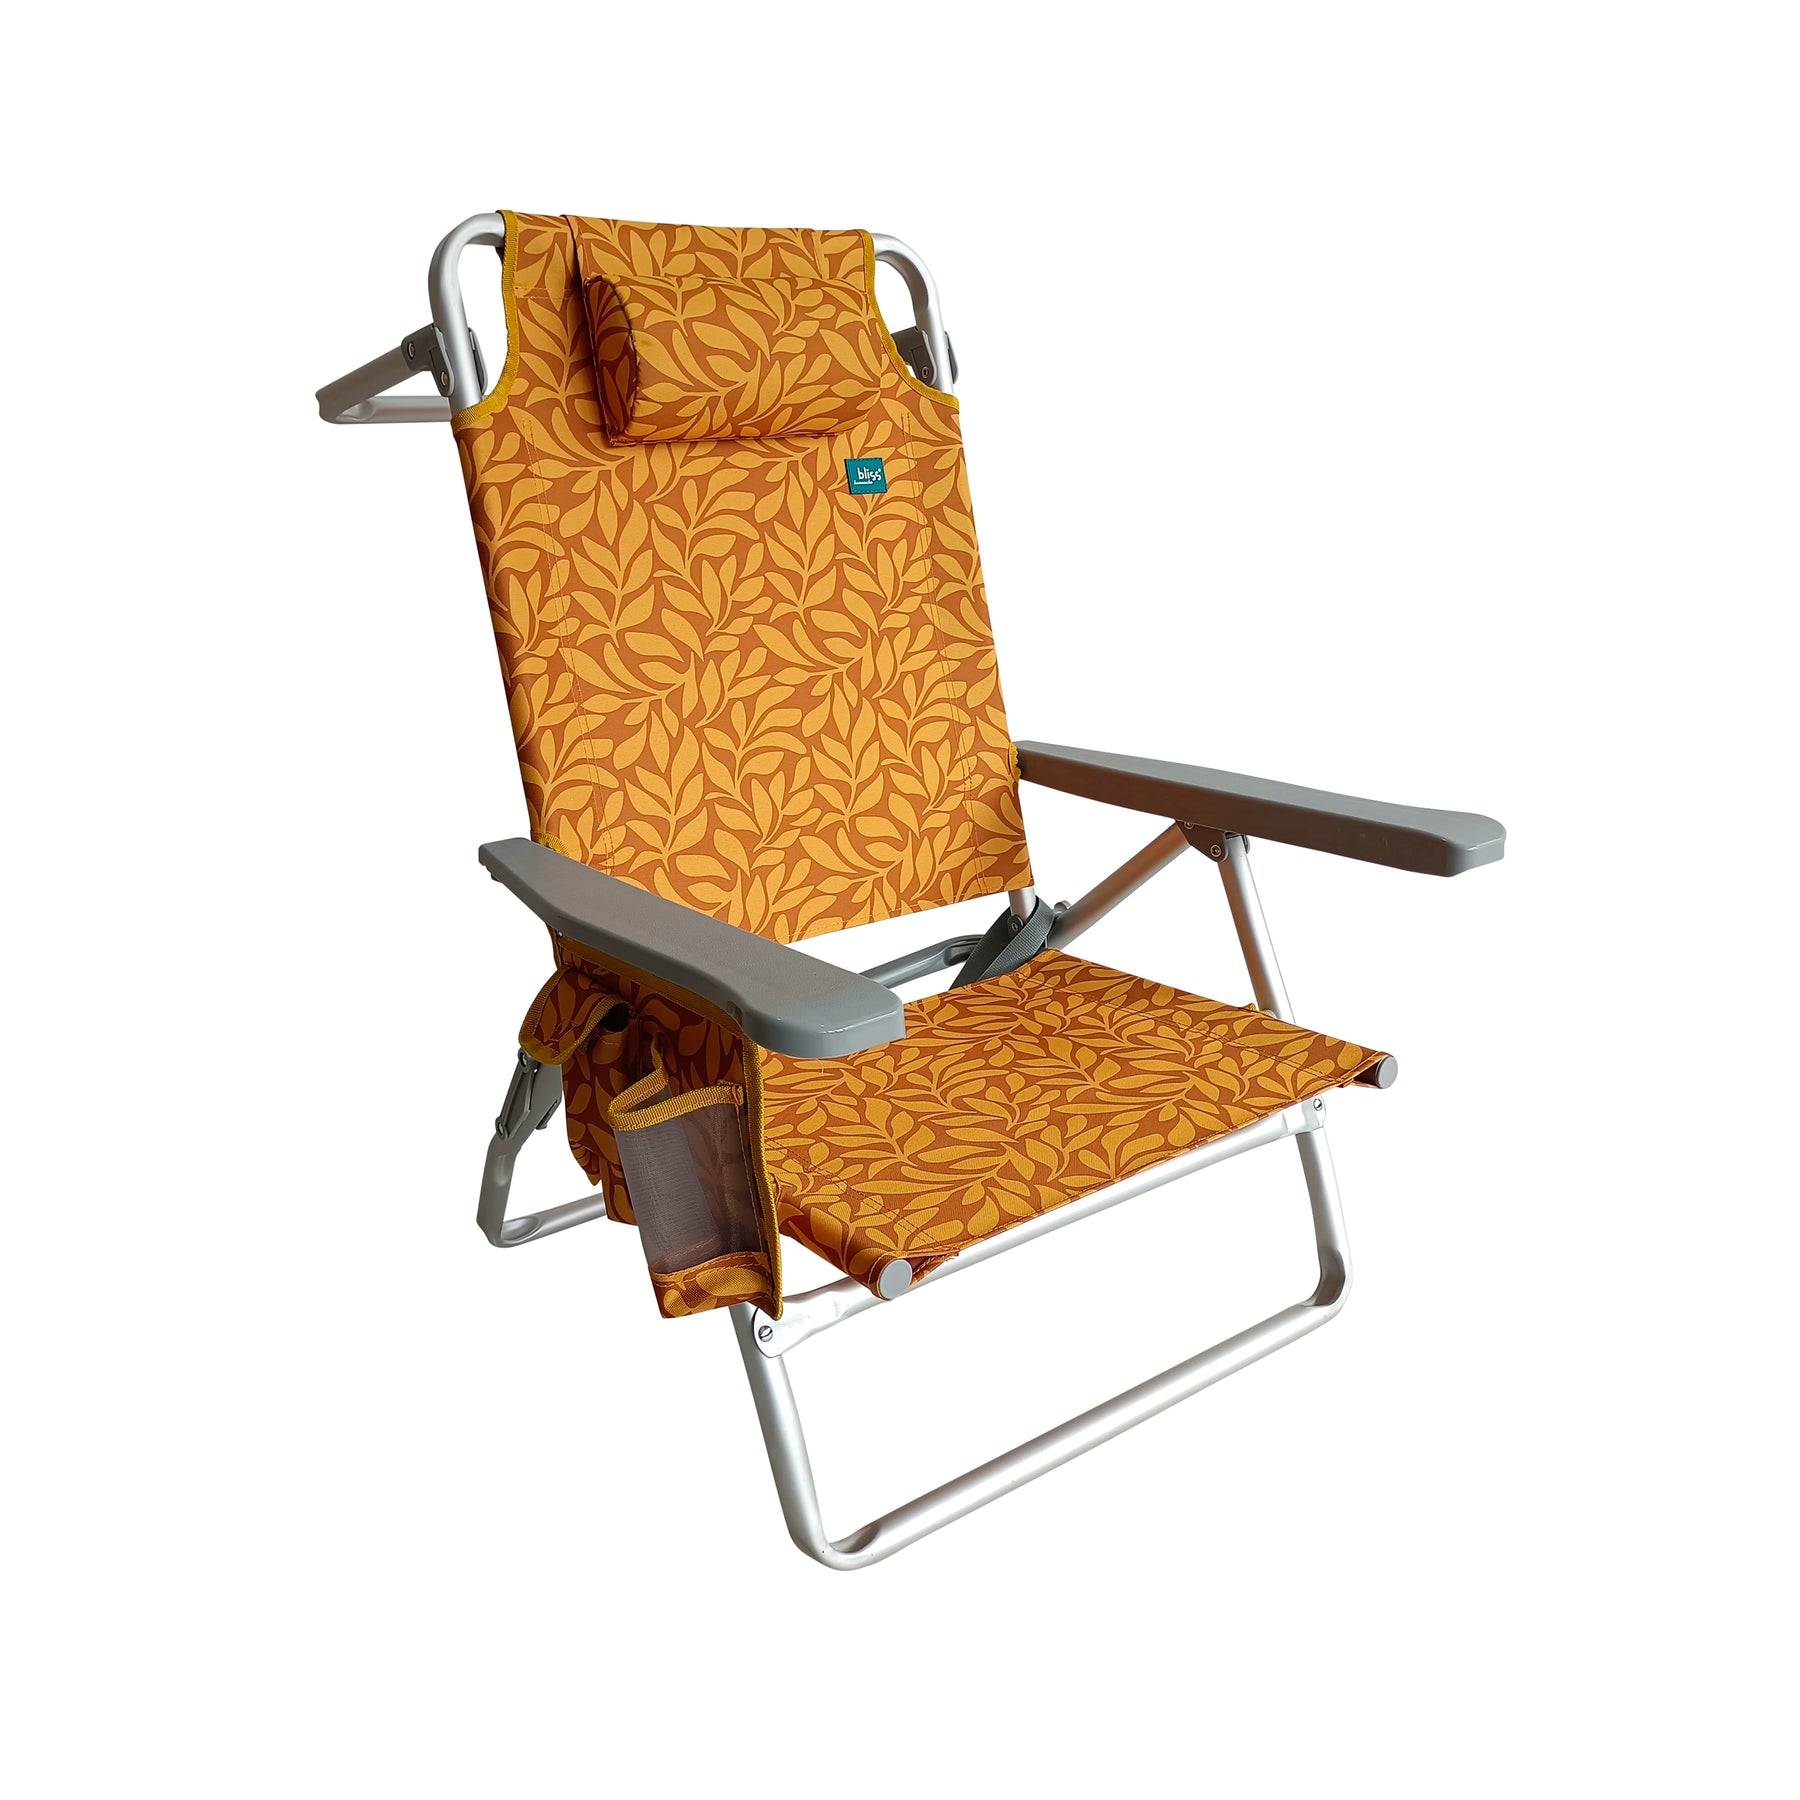 Bliss Hammocks Folding Beach Chair with Towel Rack, cup holder, and side pocket. Amber Leaf variation is an orange color with a light orange leaf pattern.